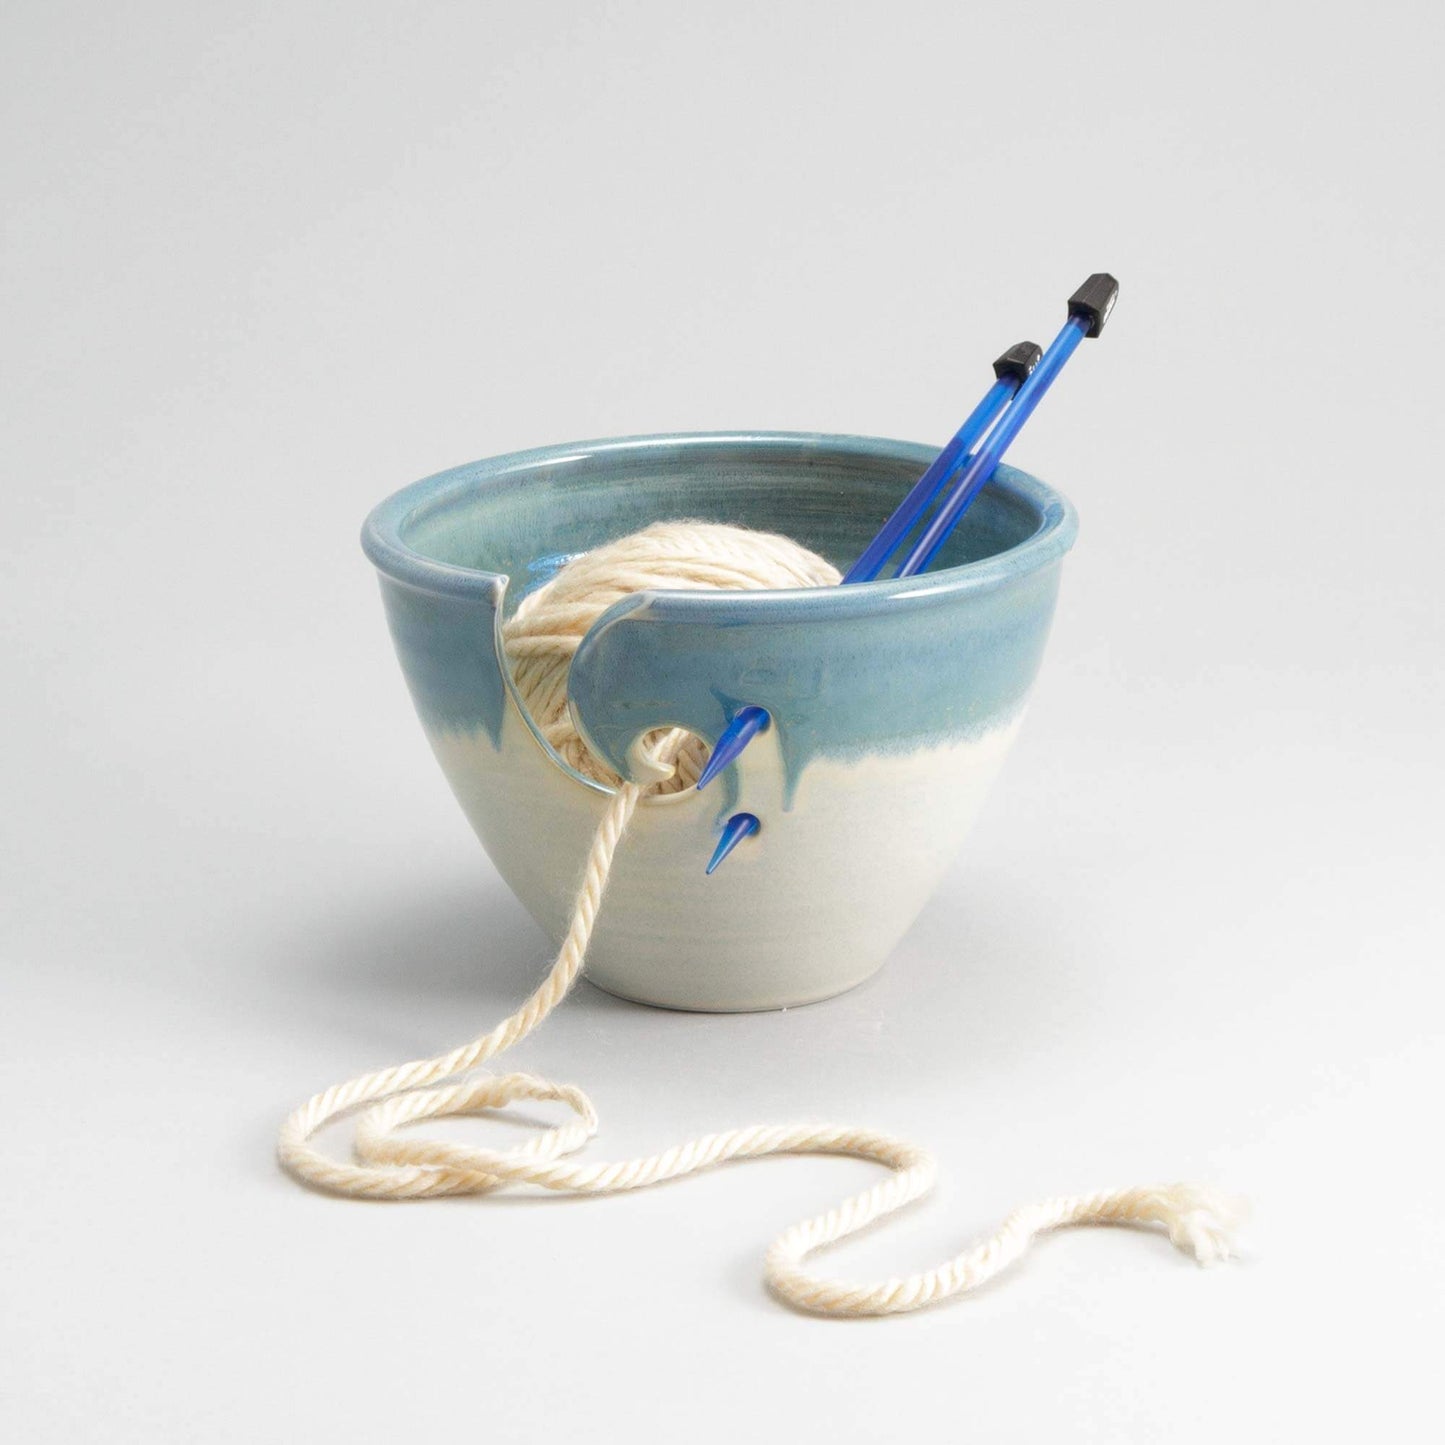 Handmade Pottery Knitting Bowl in Ivory & Blue pattern made by Georgetown Pottery in Maine